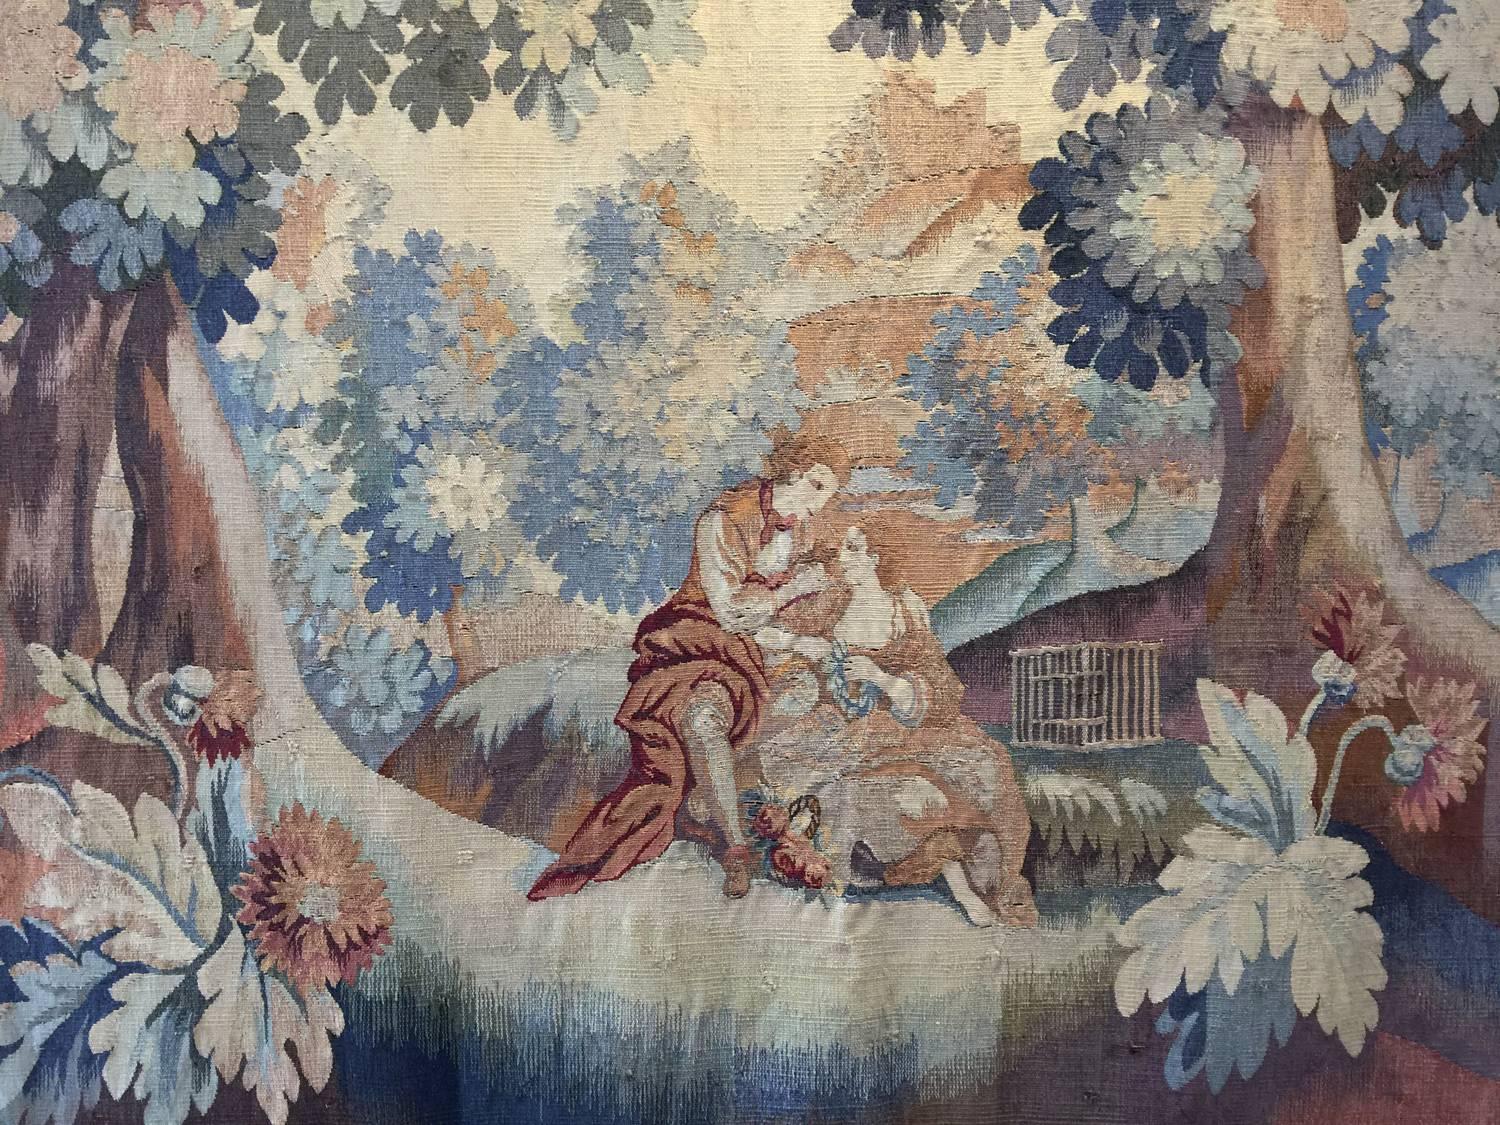 A fabulous 19th-century handwoven tapestry in excellent condition. The scene of lovers celebration among nature. A similar technique is used for making the tapestry as in Aubusson and Needlepoint in the flat weave role. These groups of decorative